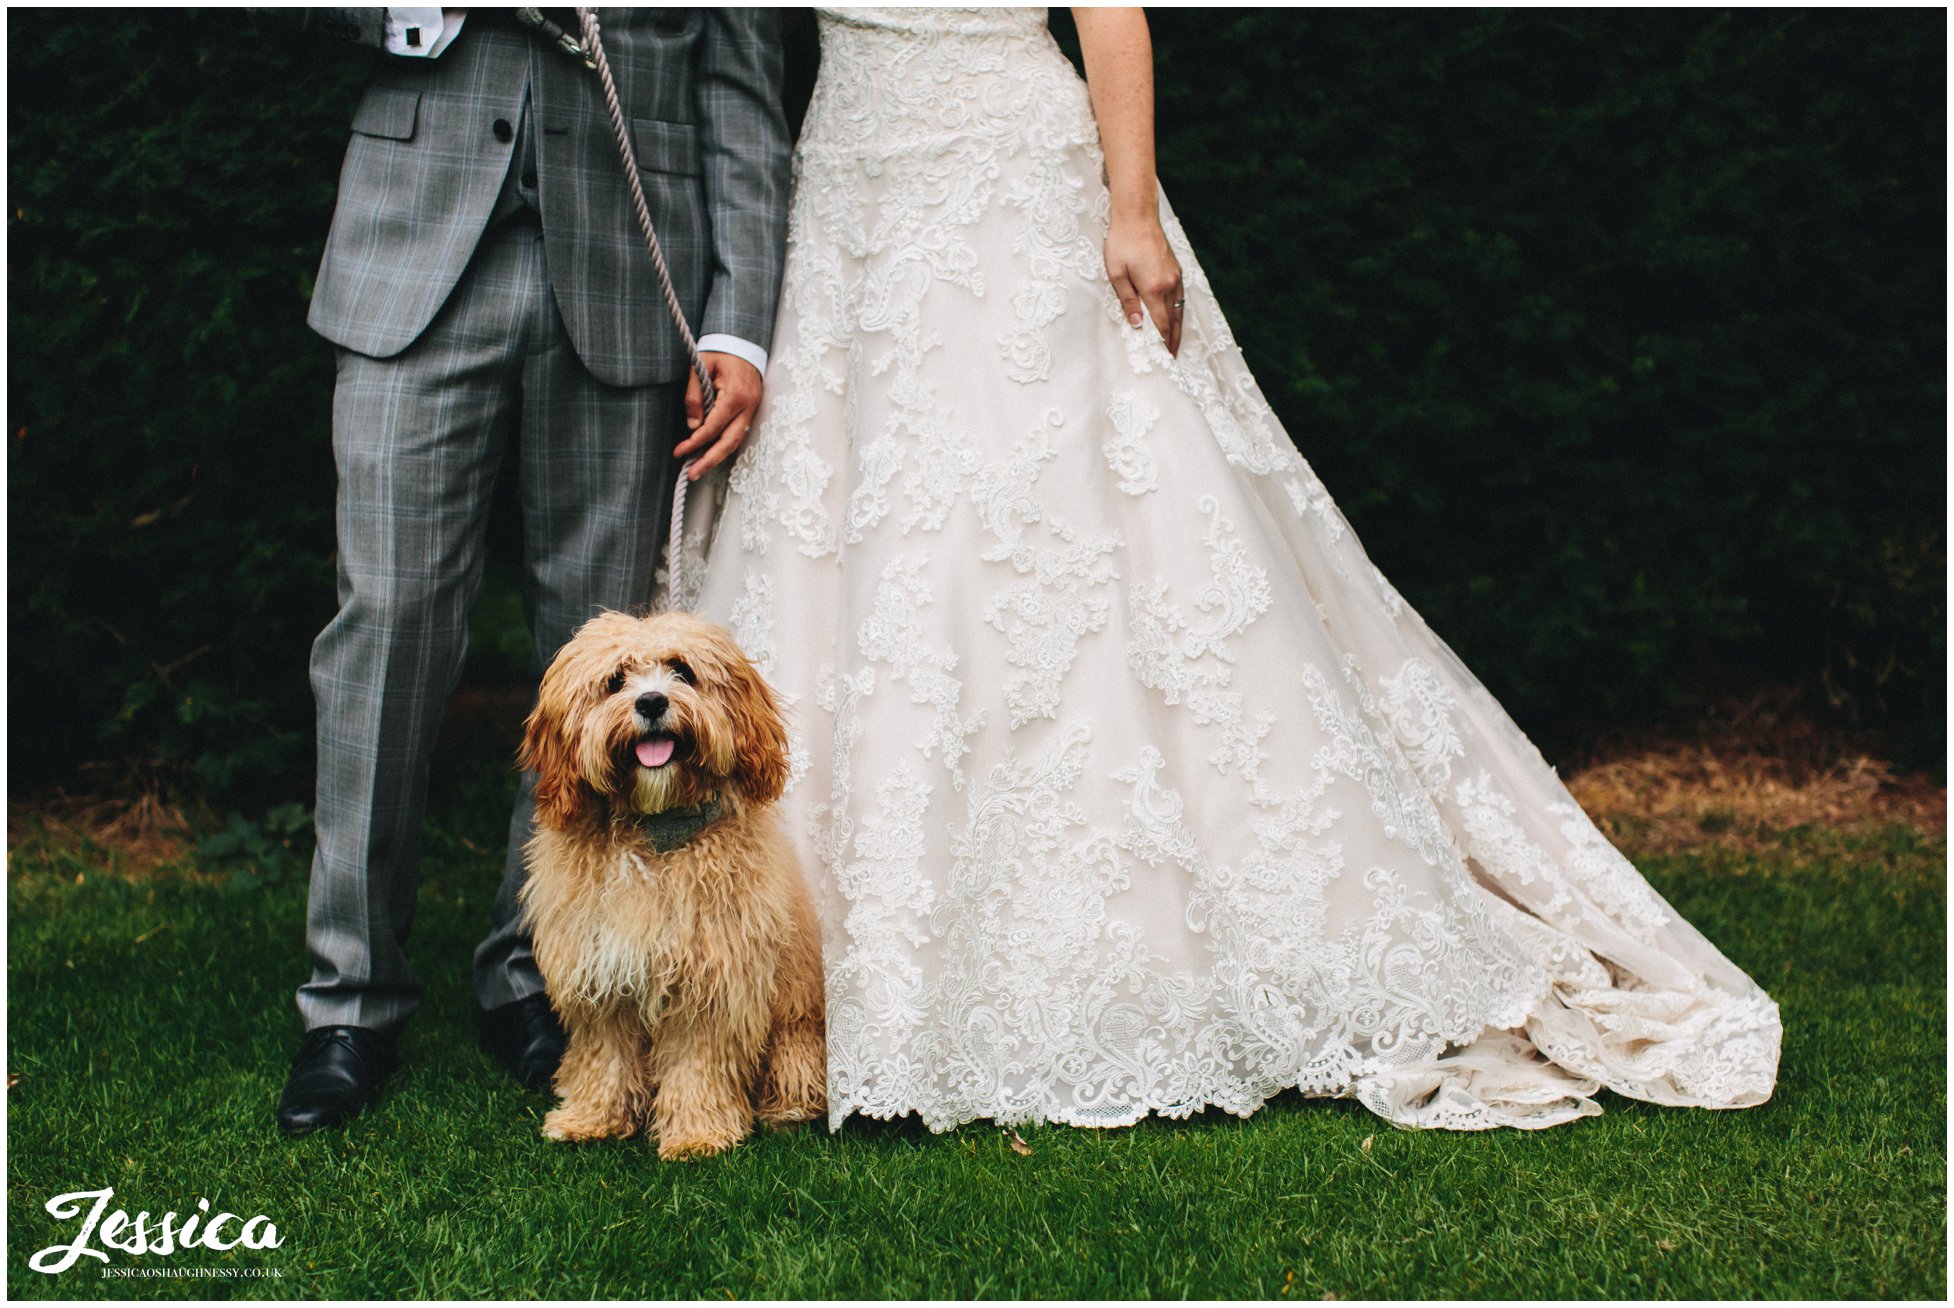 close up of dog stood in front of bride & groom